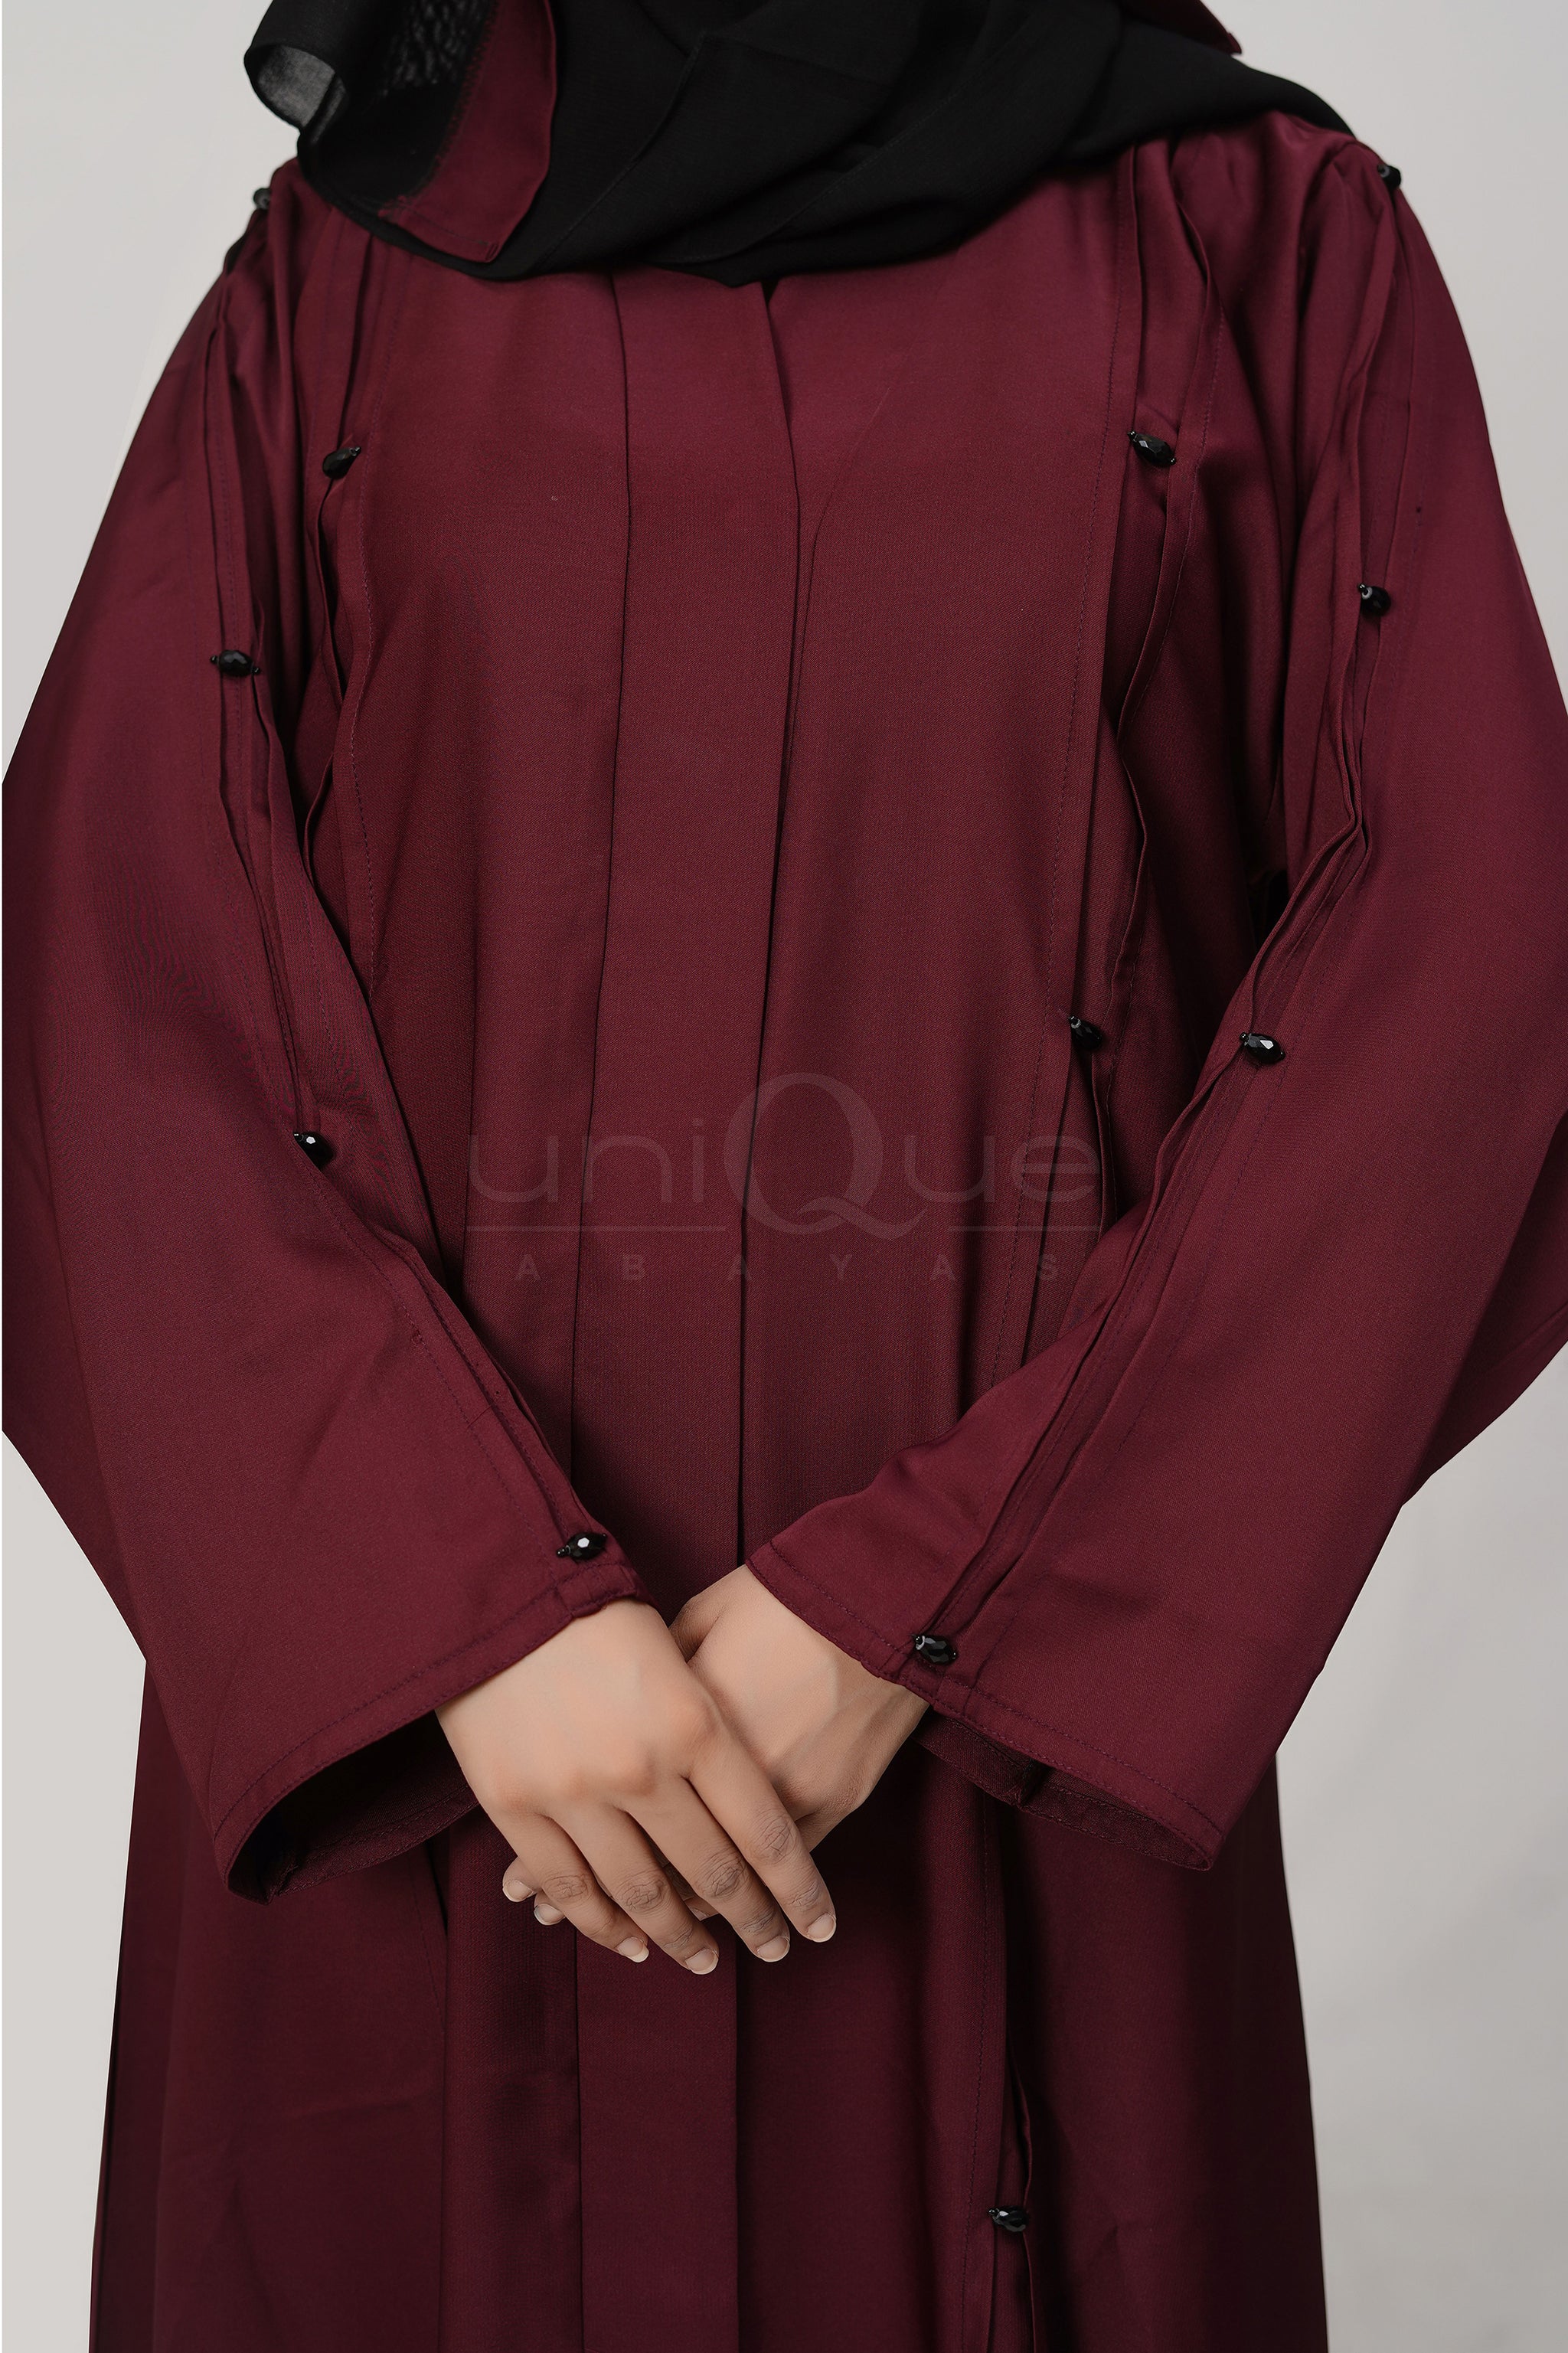 Pleated Stone Plum Abaya by Uniquewallart Abaya for Women, Front Side Close-Up Detailed